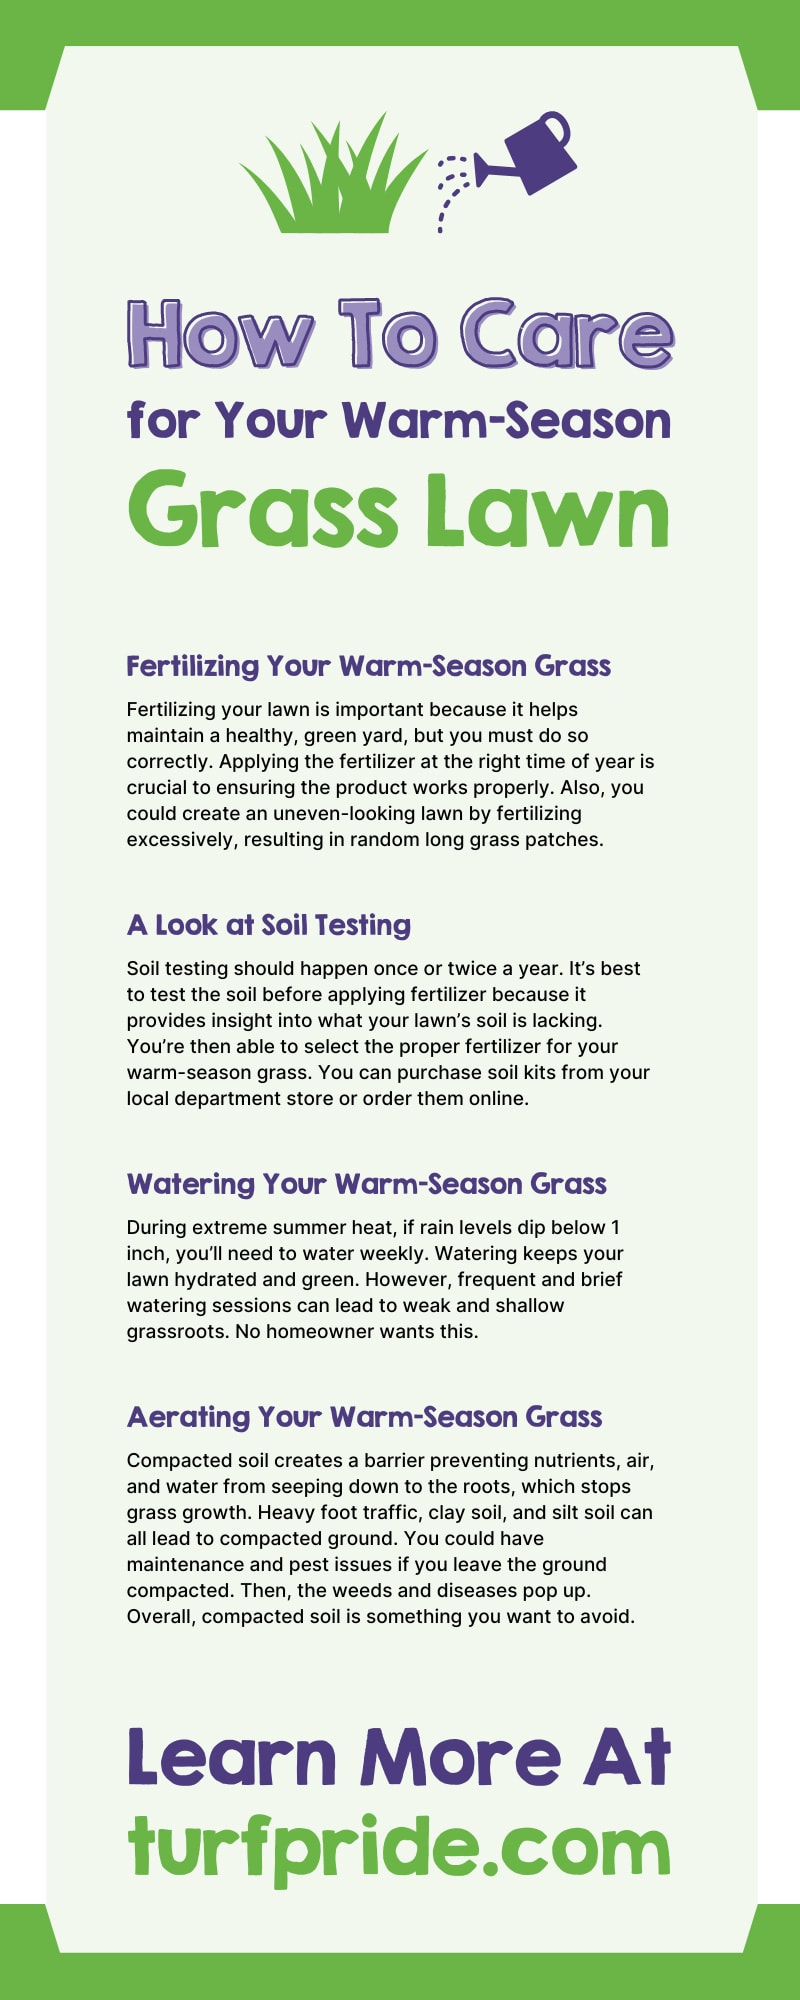 How To Care for Your Warm-Season Grass Lawn